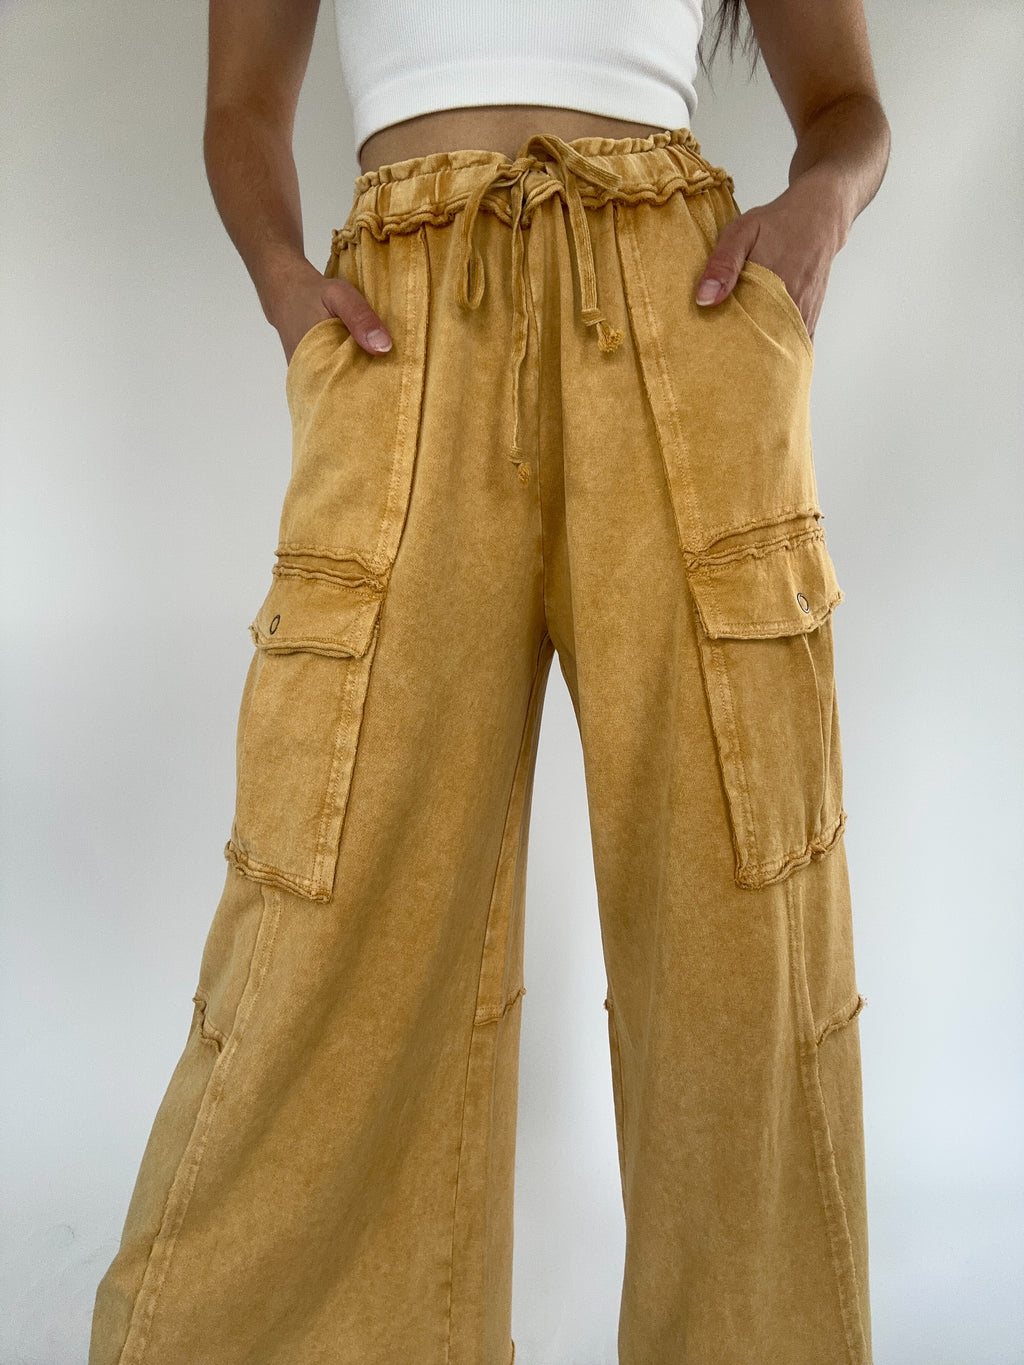 Middle Of The Road Pants - Mustard